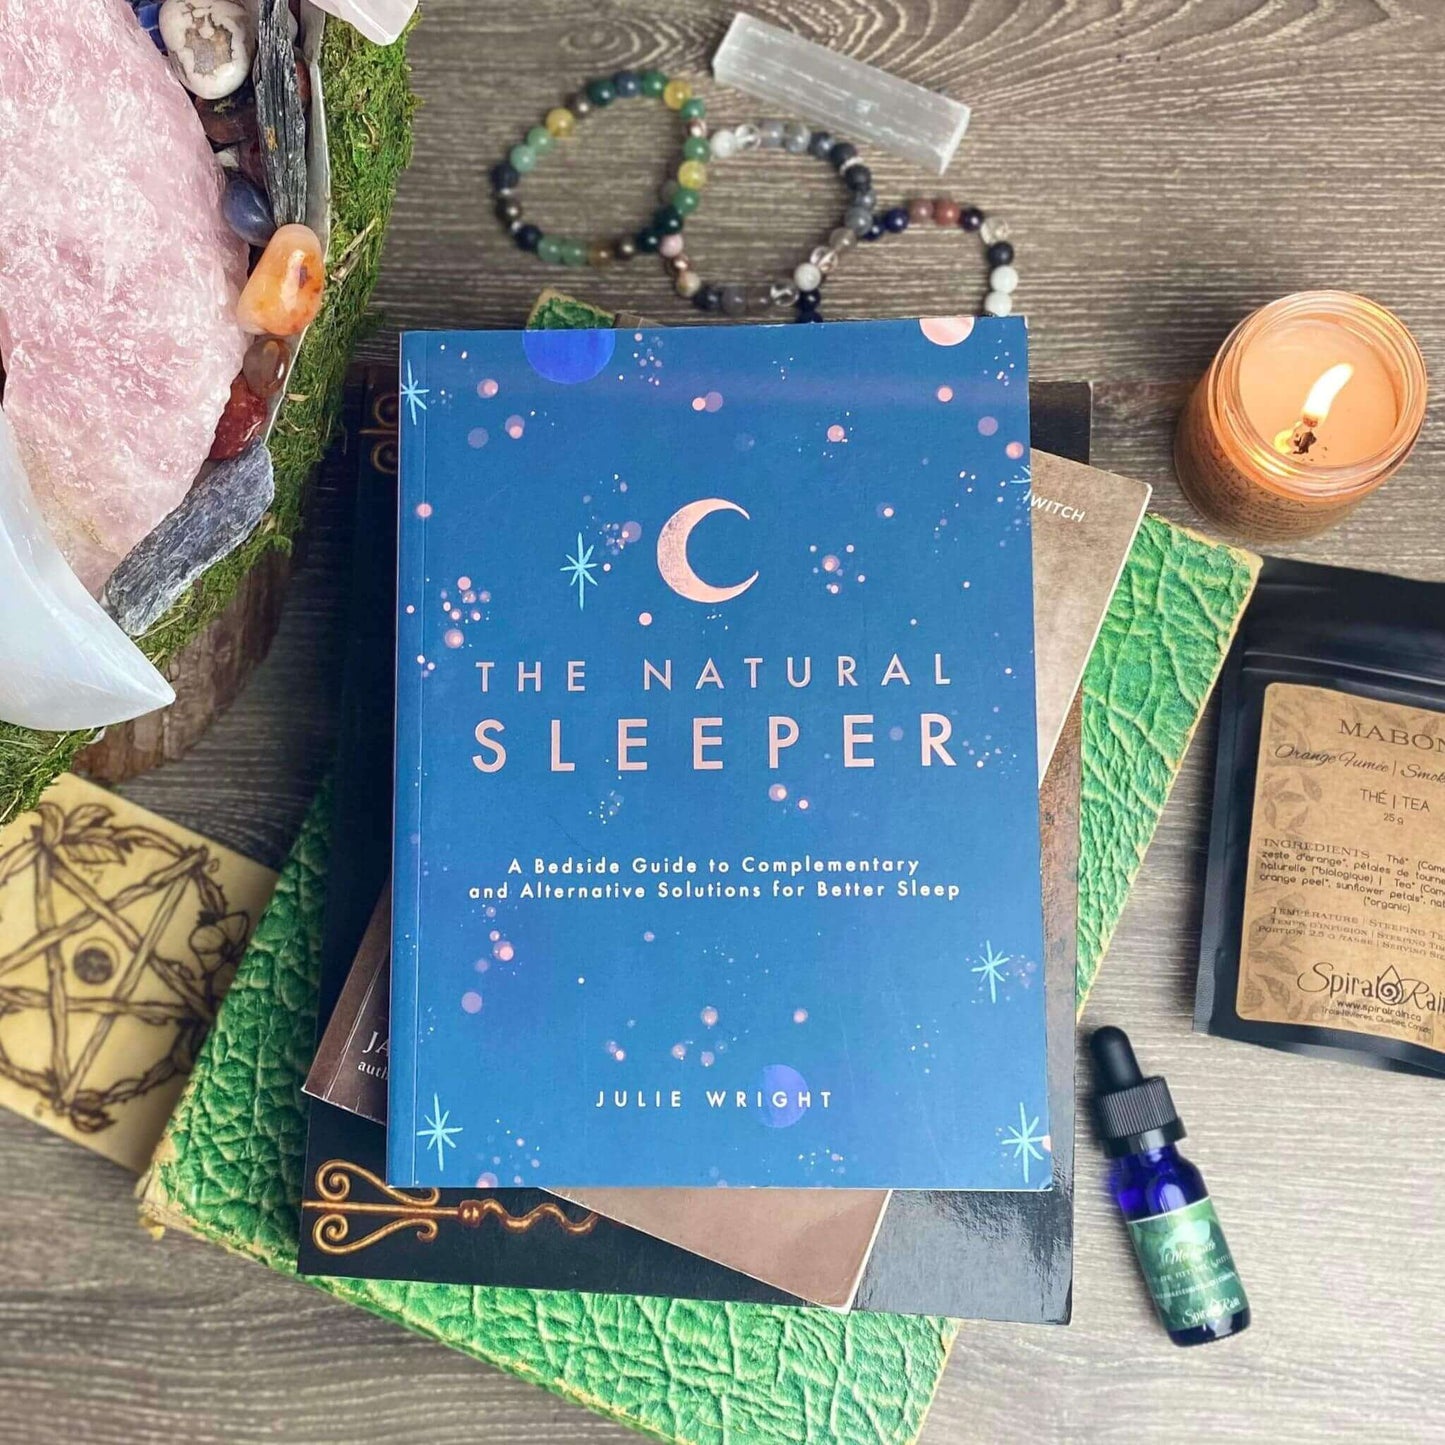 THE NATURAL SLEEPER: A BEDSIDE GUIDE TO COMPLEMENTARY AND ALTERNATIVE SOLUTIONS FOR BETTER SLEEP at $25.99 only from Spiral Rain